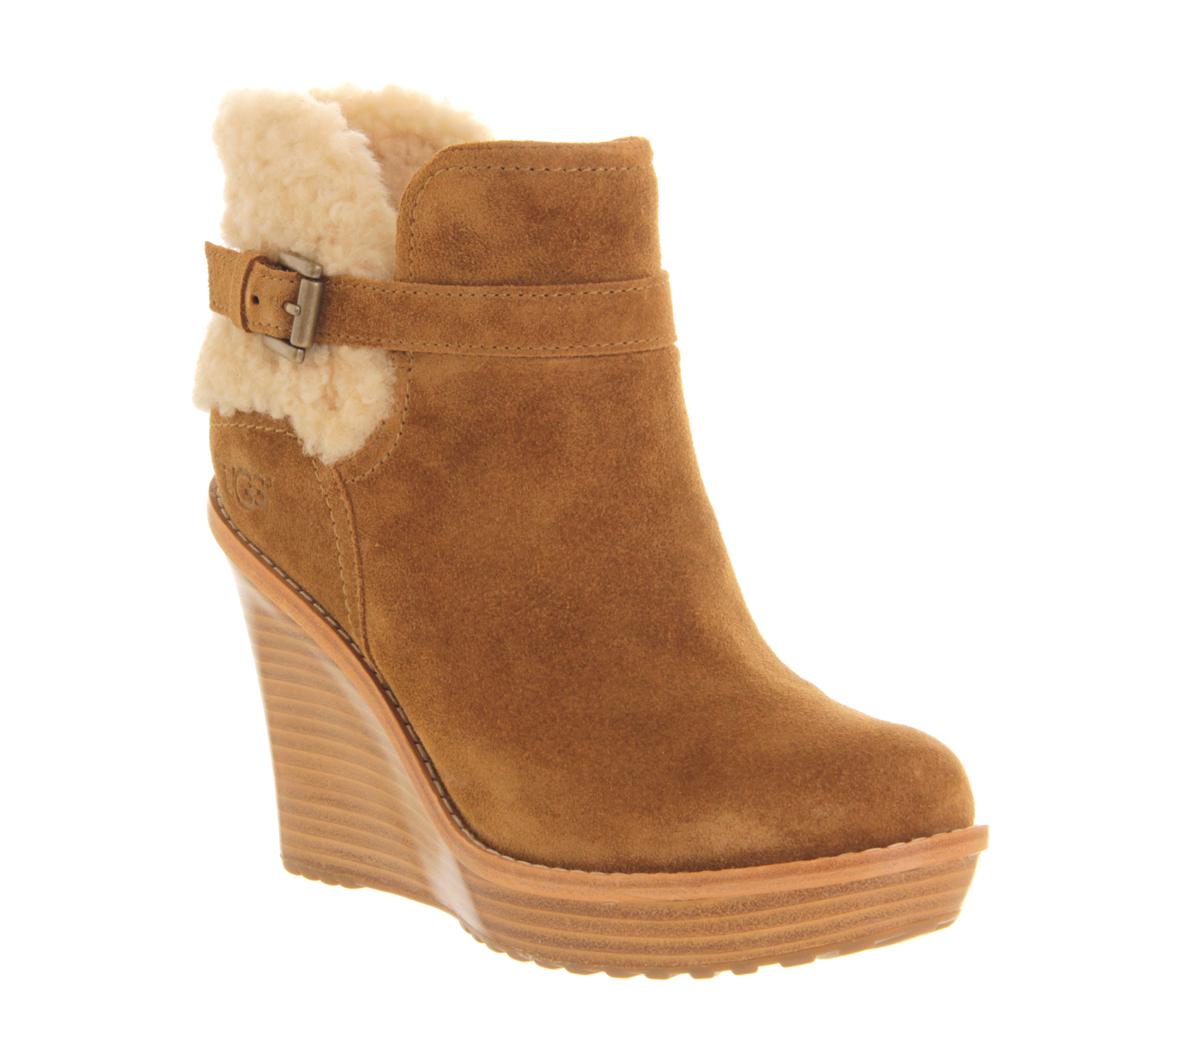 UGG Anais Wedge Ankle Boots in Chestnut (Brown) - Lyst